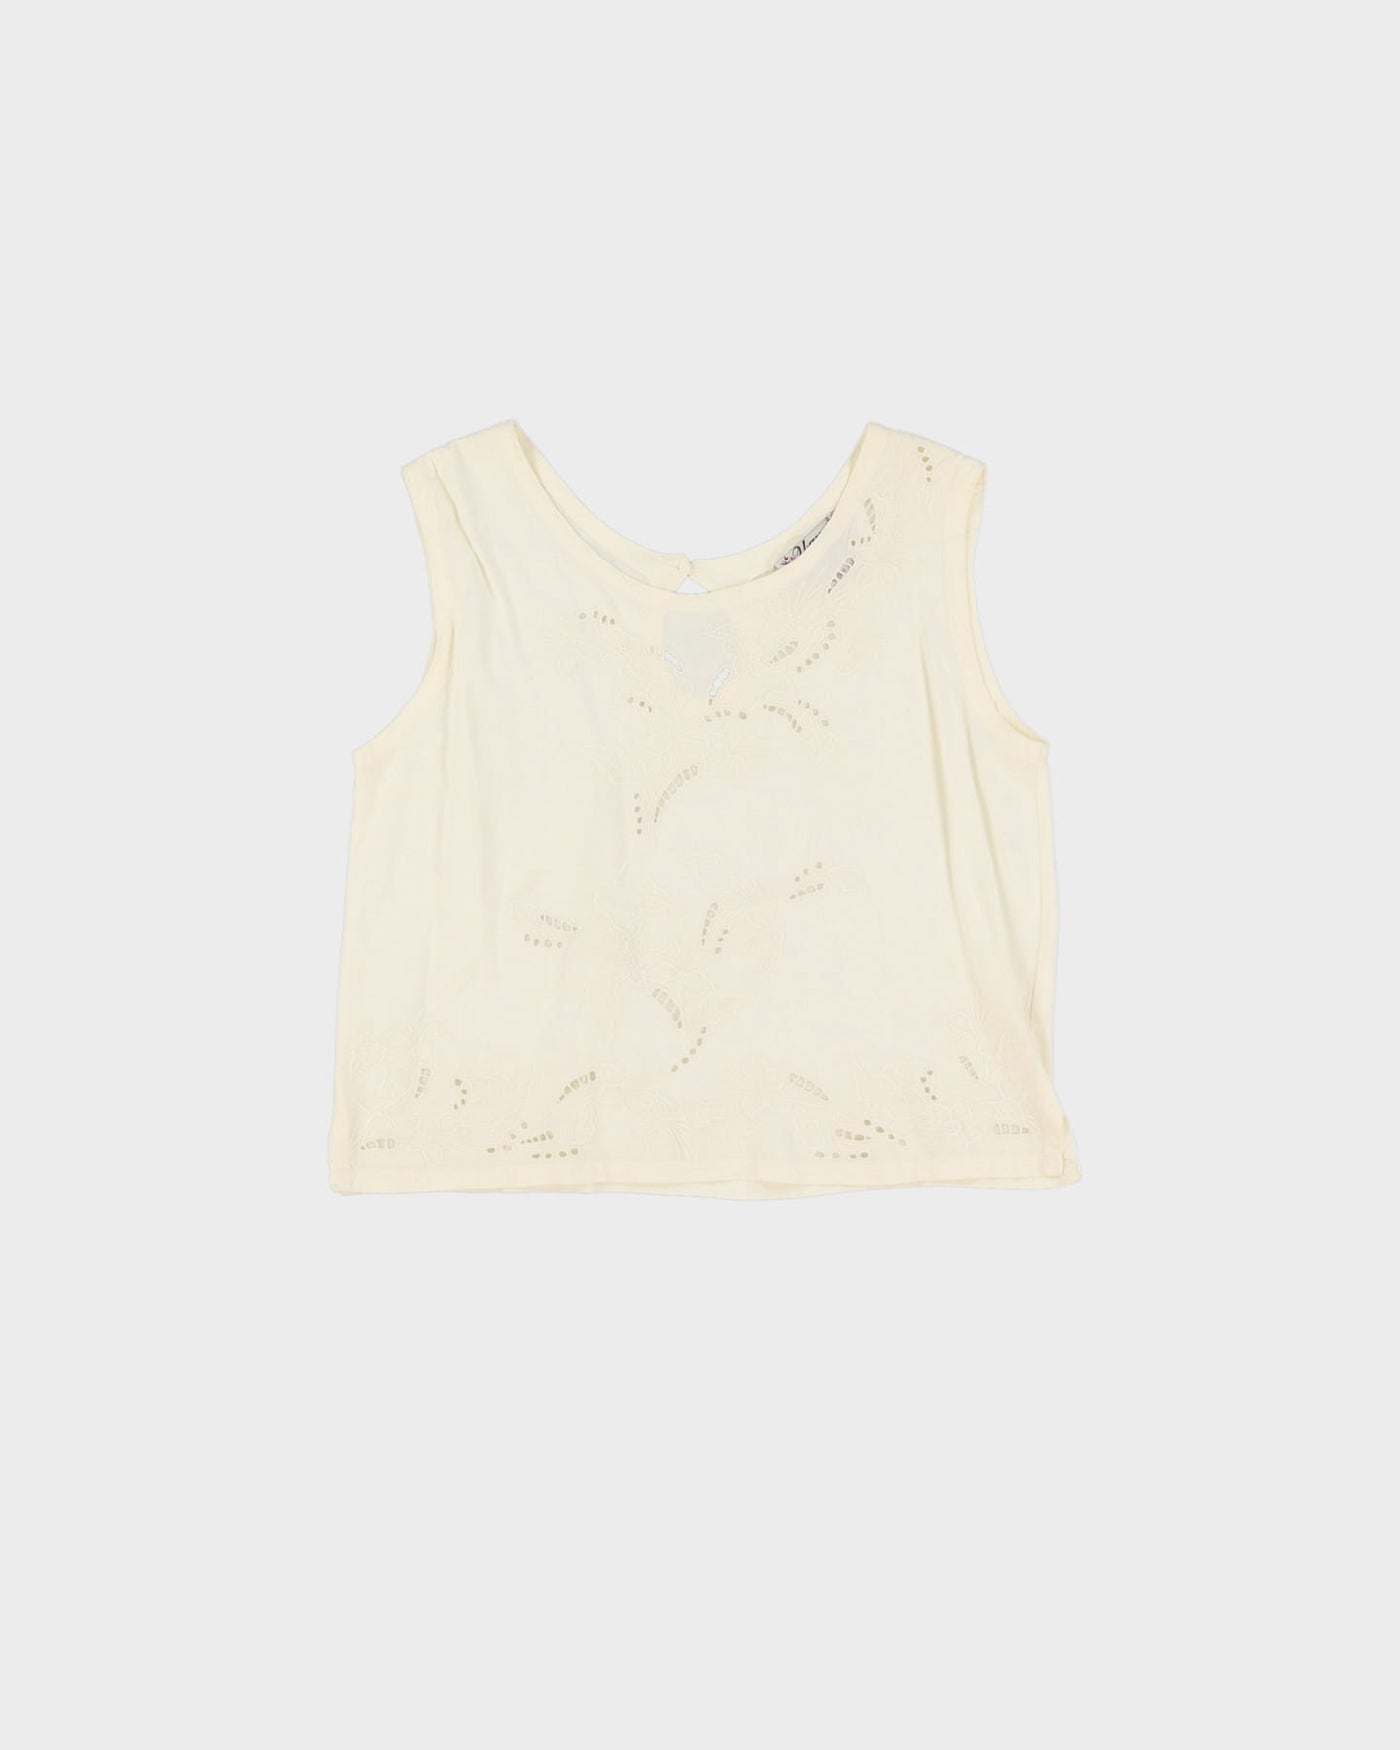 Yaya White Crop Embroidered Sleeveless Top Blouse - L